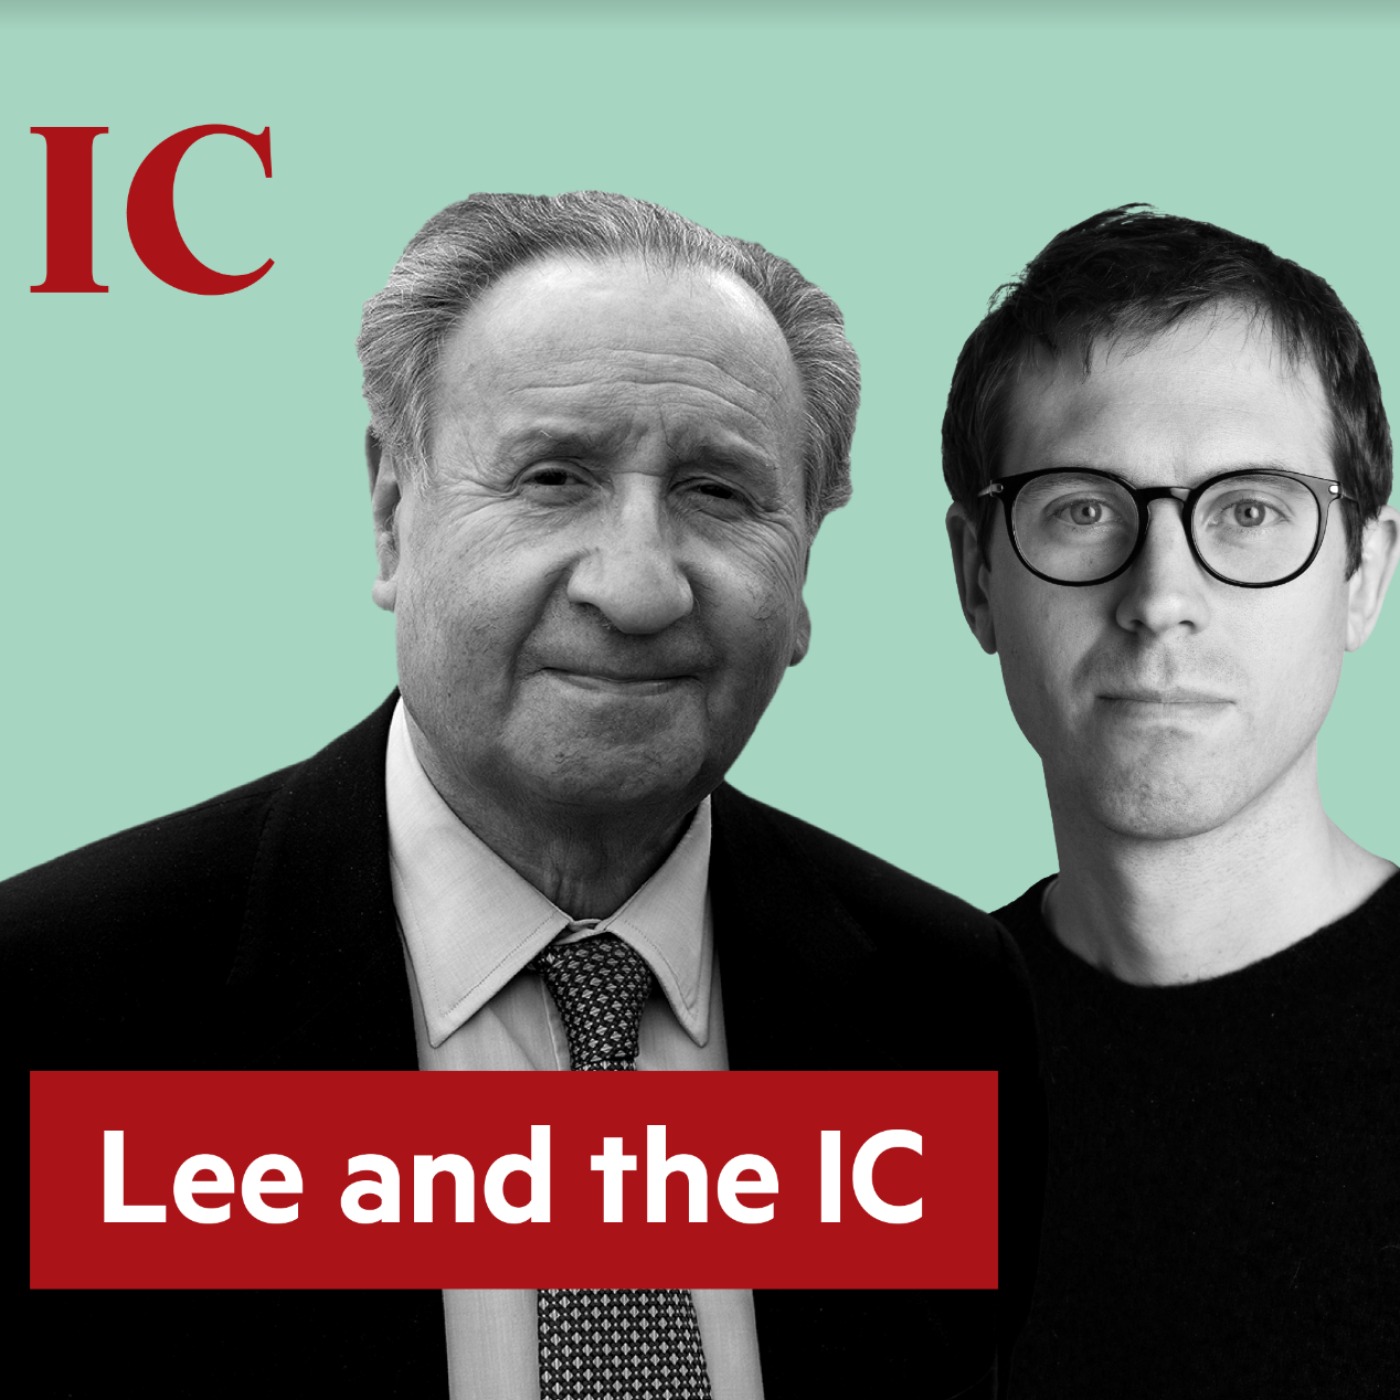 ‘Cultural attitudes around investing need to change’: Lee and the IC